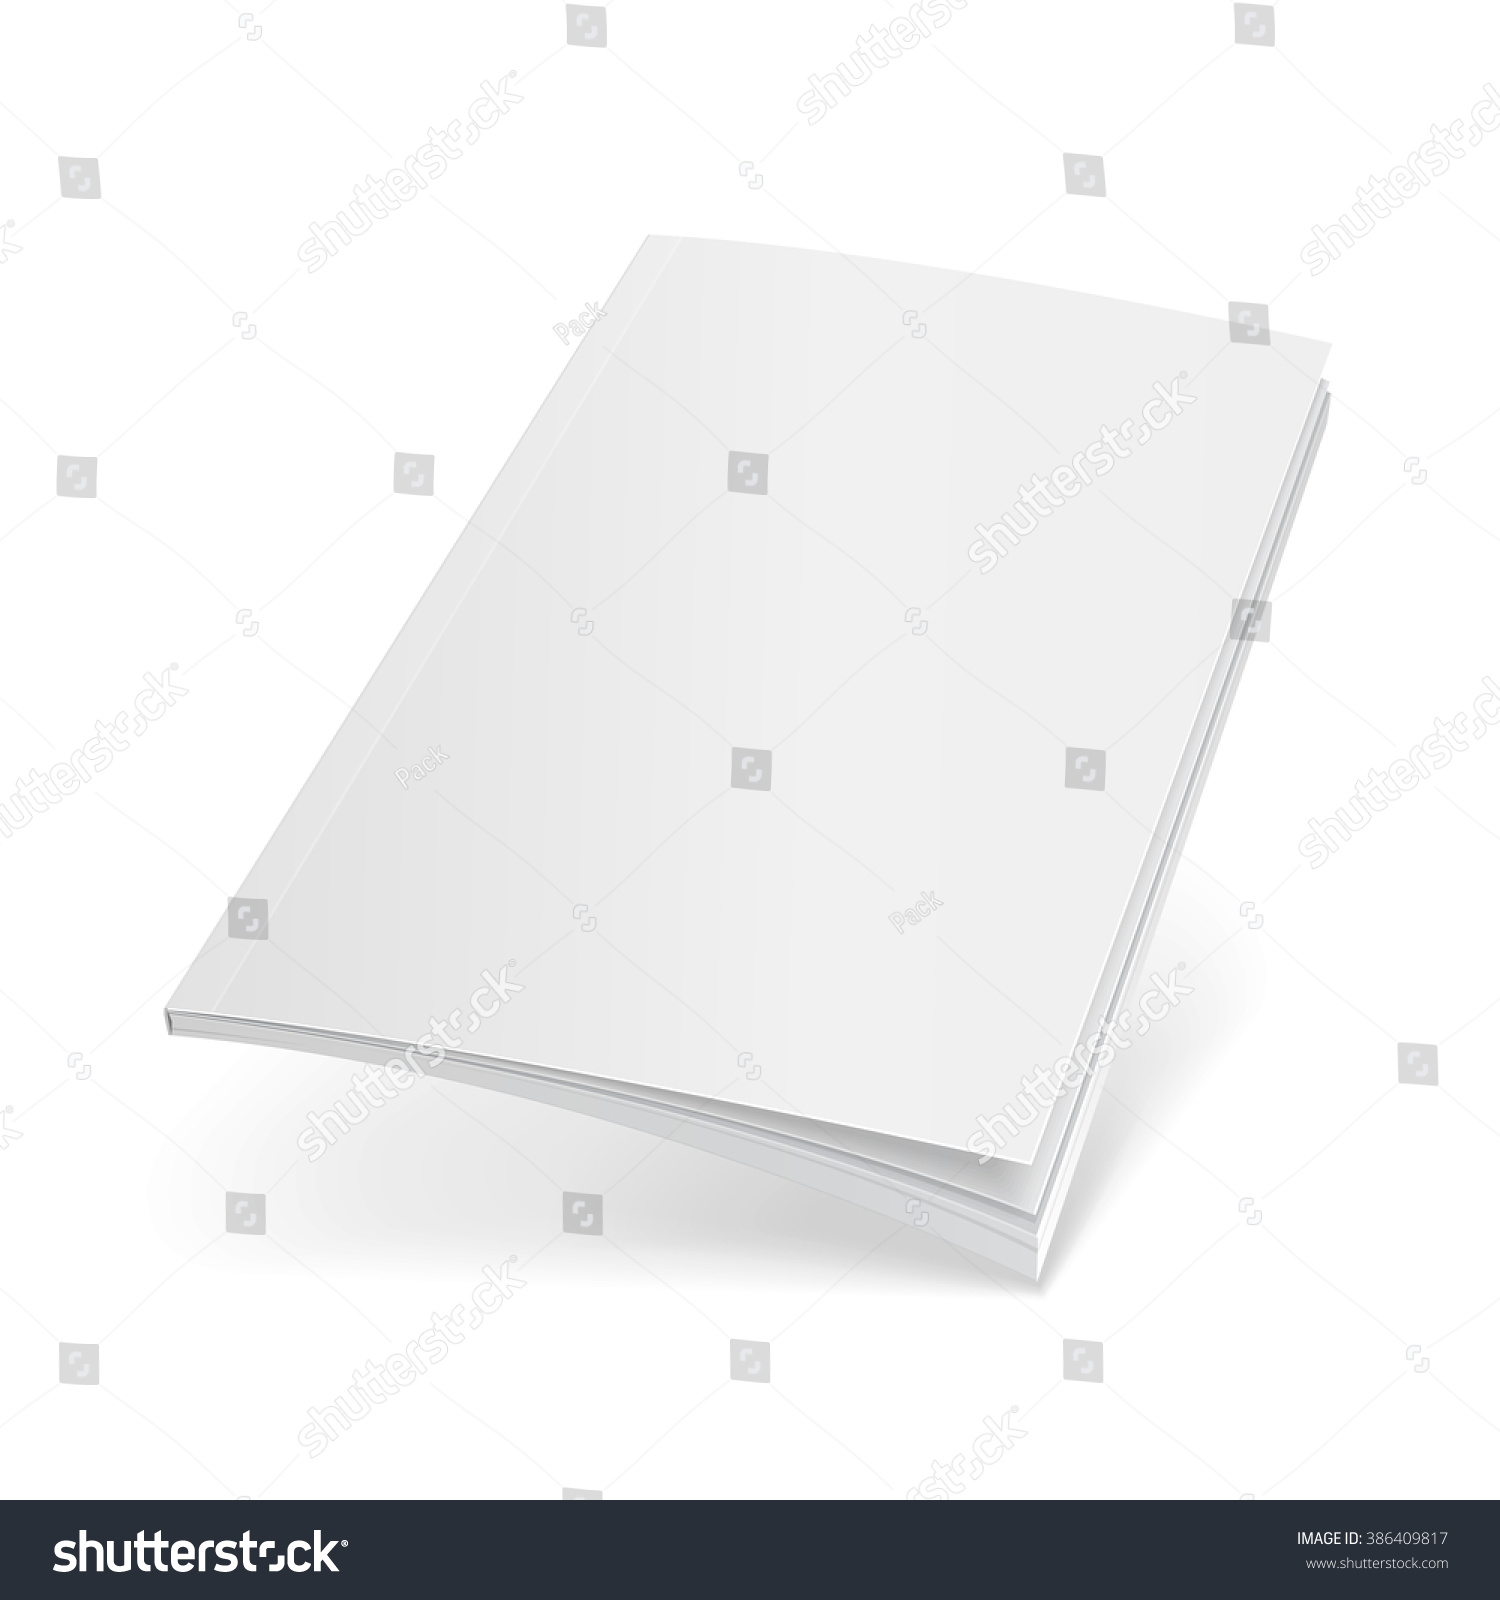 Blank Flying Cover Of Magazine, Book, Booklet, Brochure. Illustration Isolated On White Background. Mock Up Template Ready For Your Design. Vector EPS10 #386409817